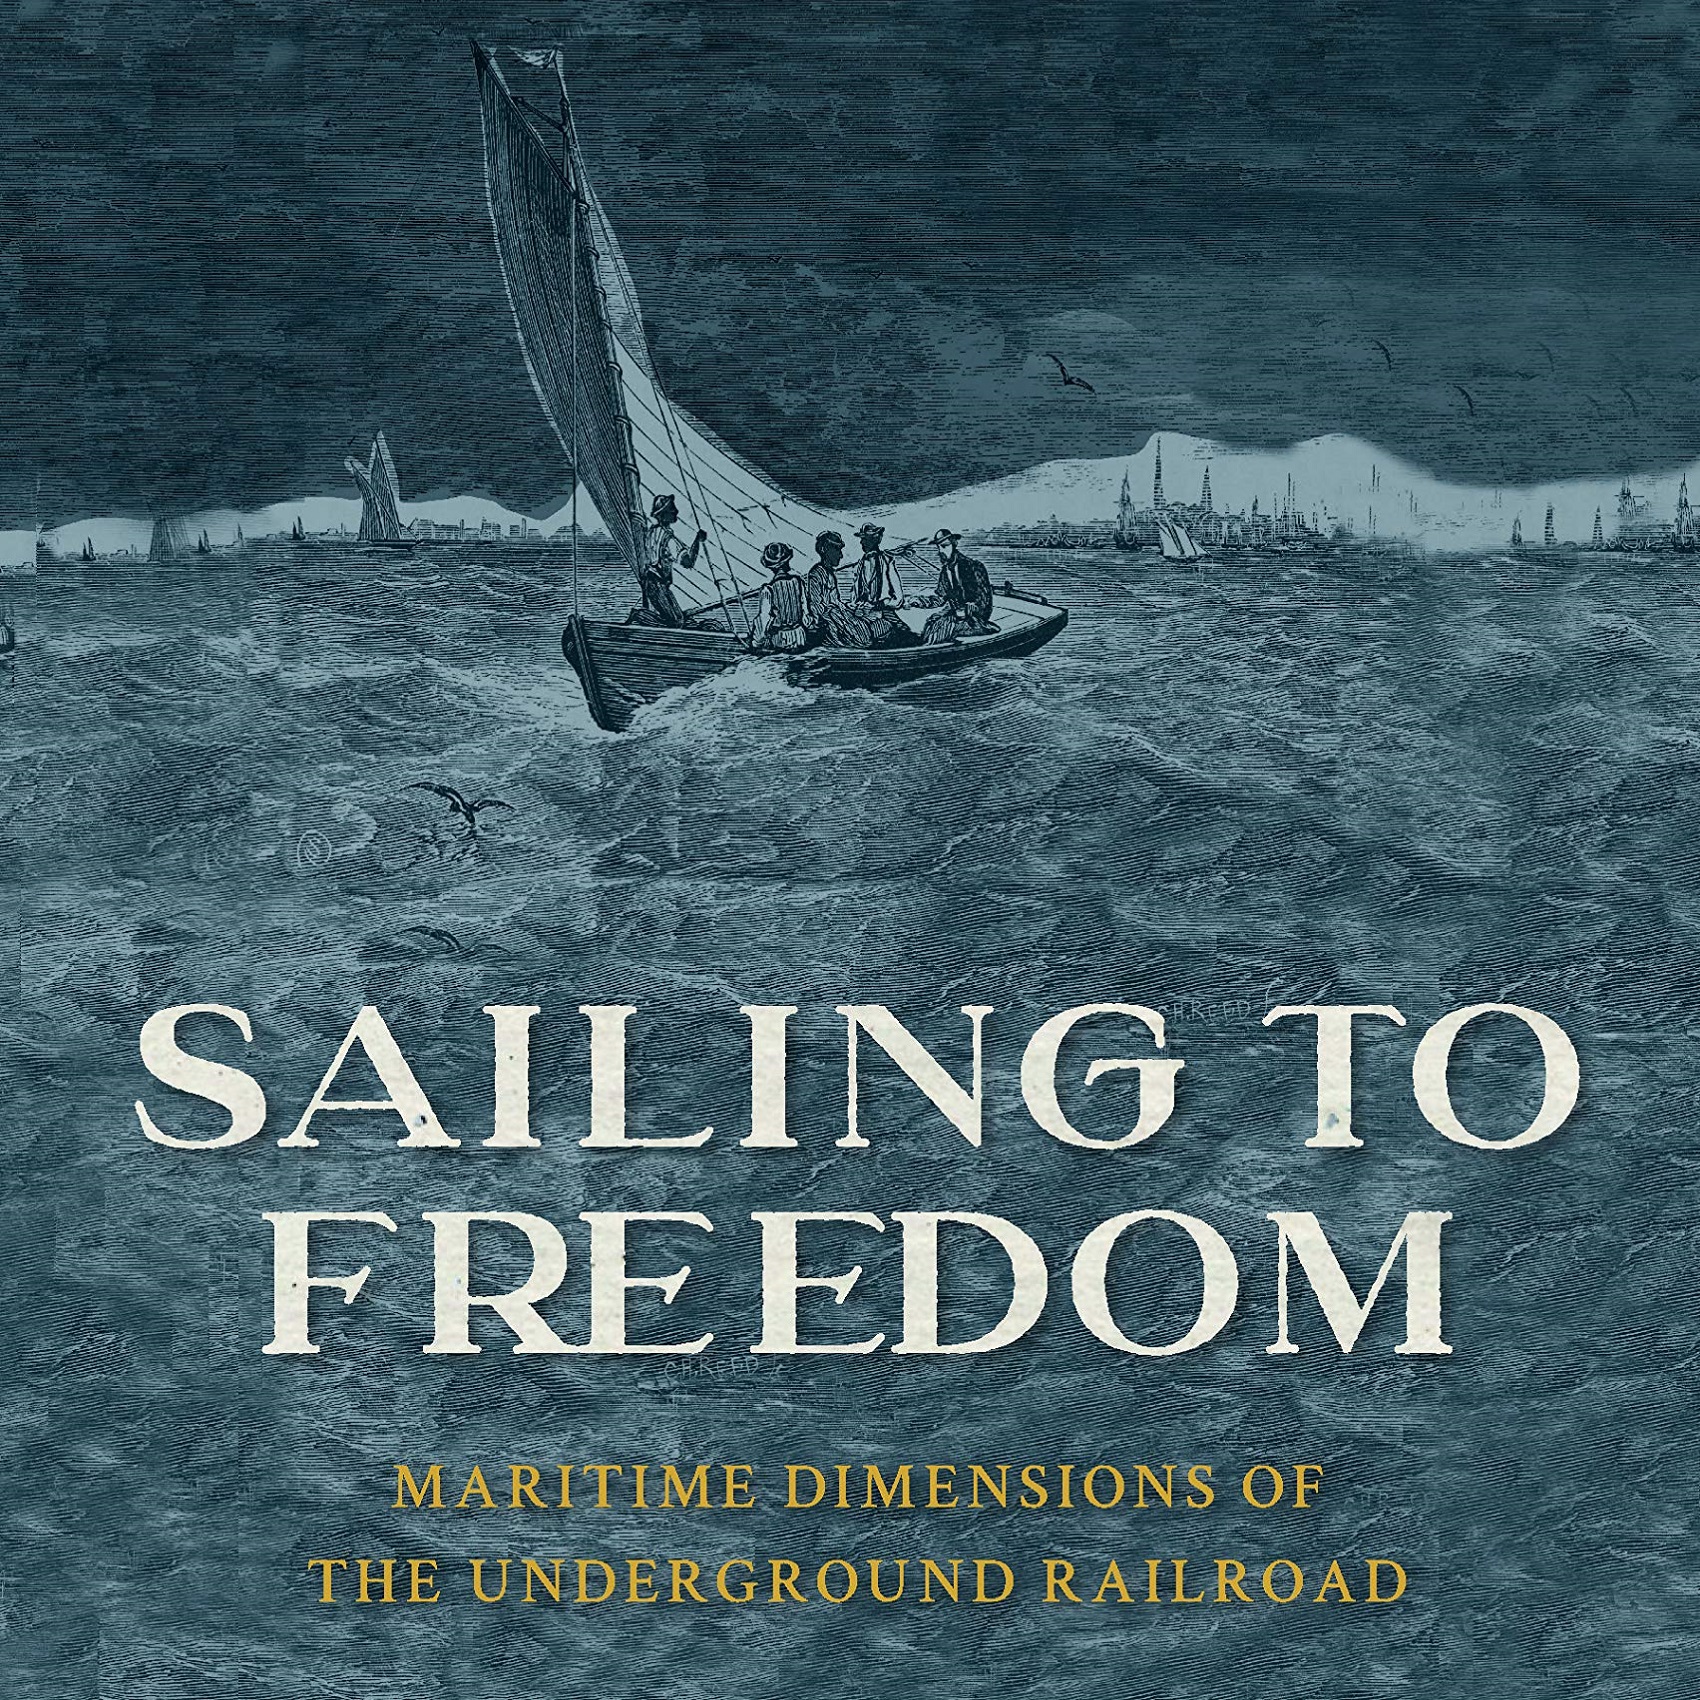 The graphic for the Sailing to Freedom: Maritime Dimensions of the Underground Railroad. Bheing that text is a drawing of a sailing ship with multiple men on the ocean, and several larger ships in the background.